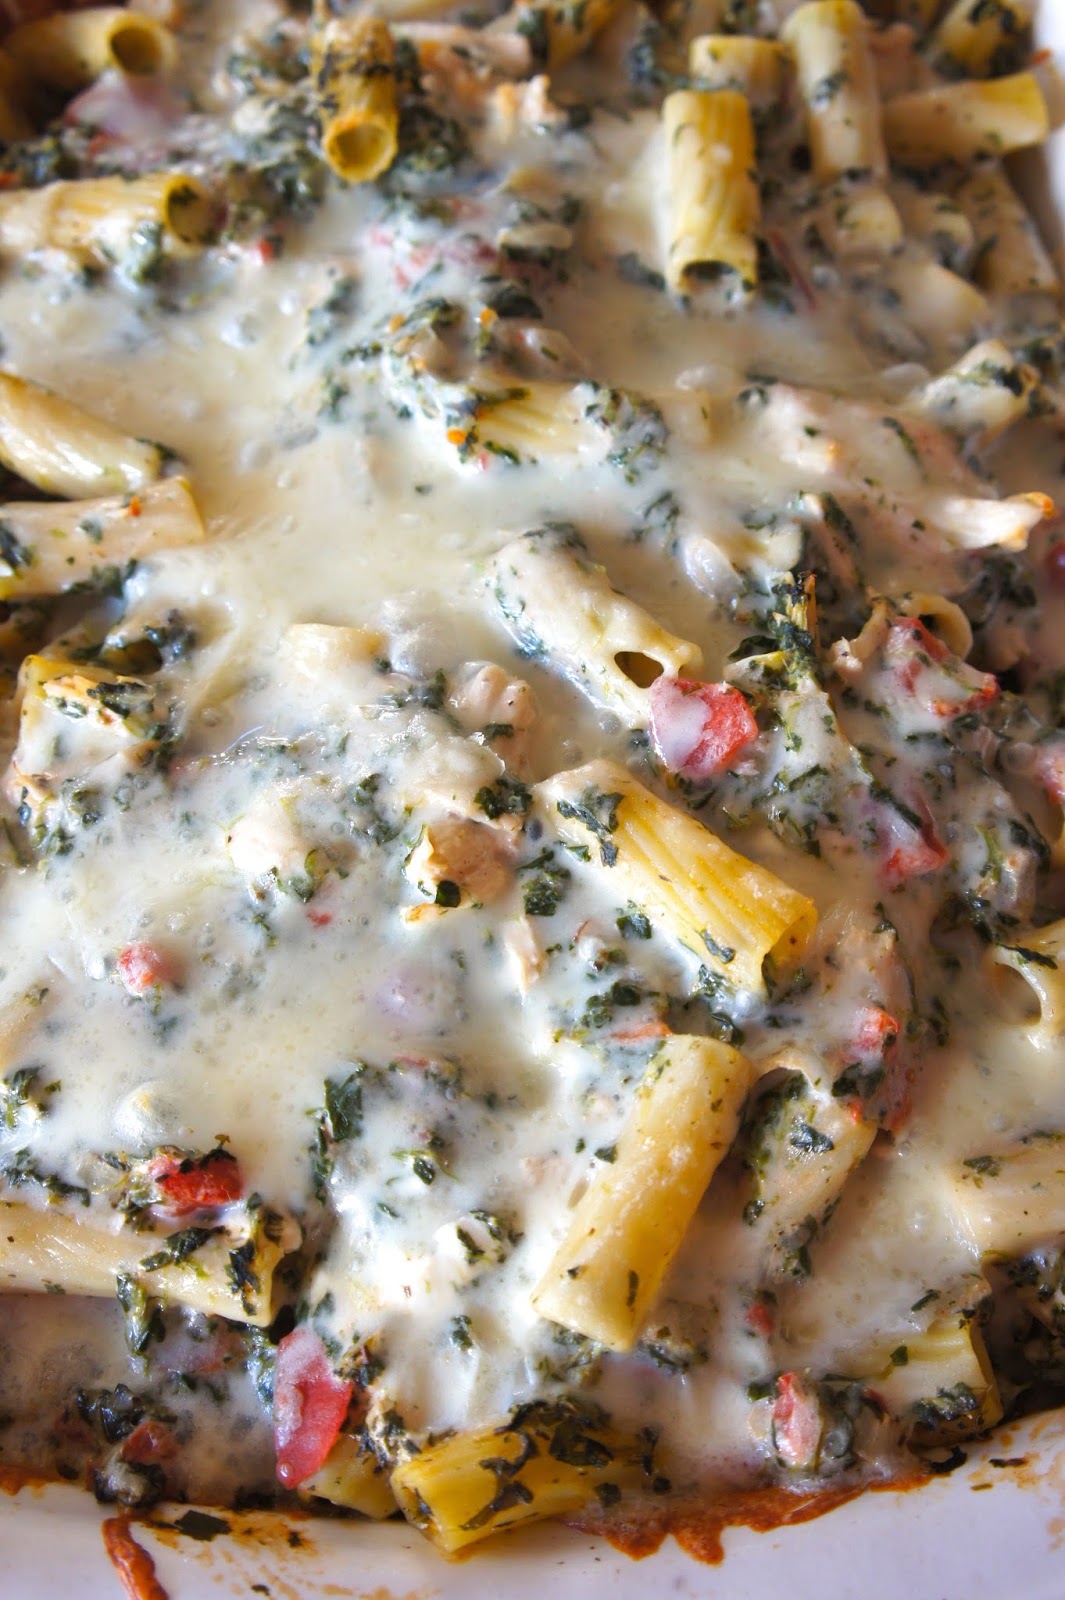 Savory Sweet and Satisfying: Chicken and Spinach Pasta Bake